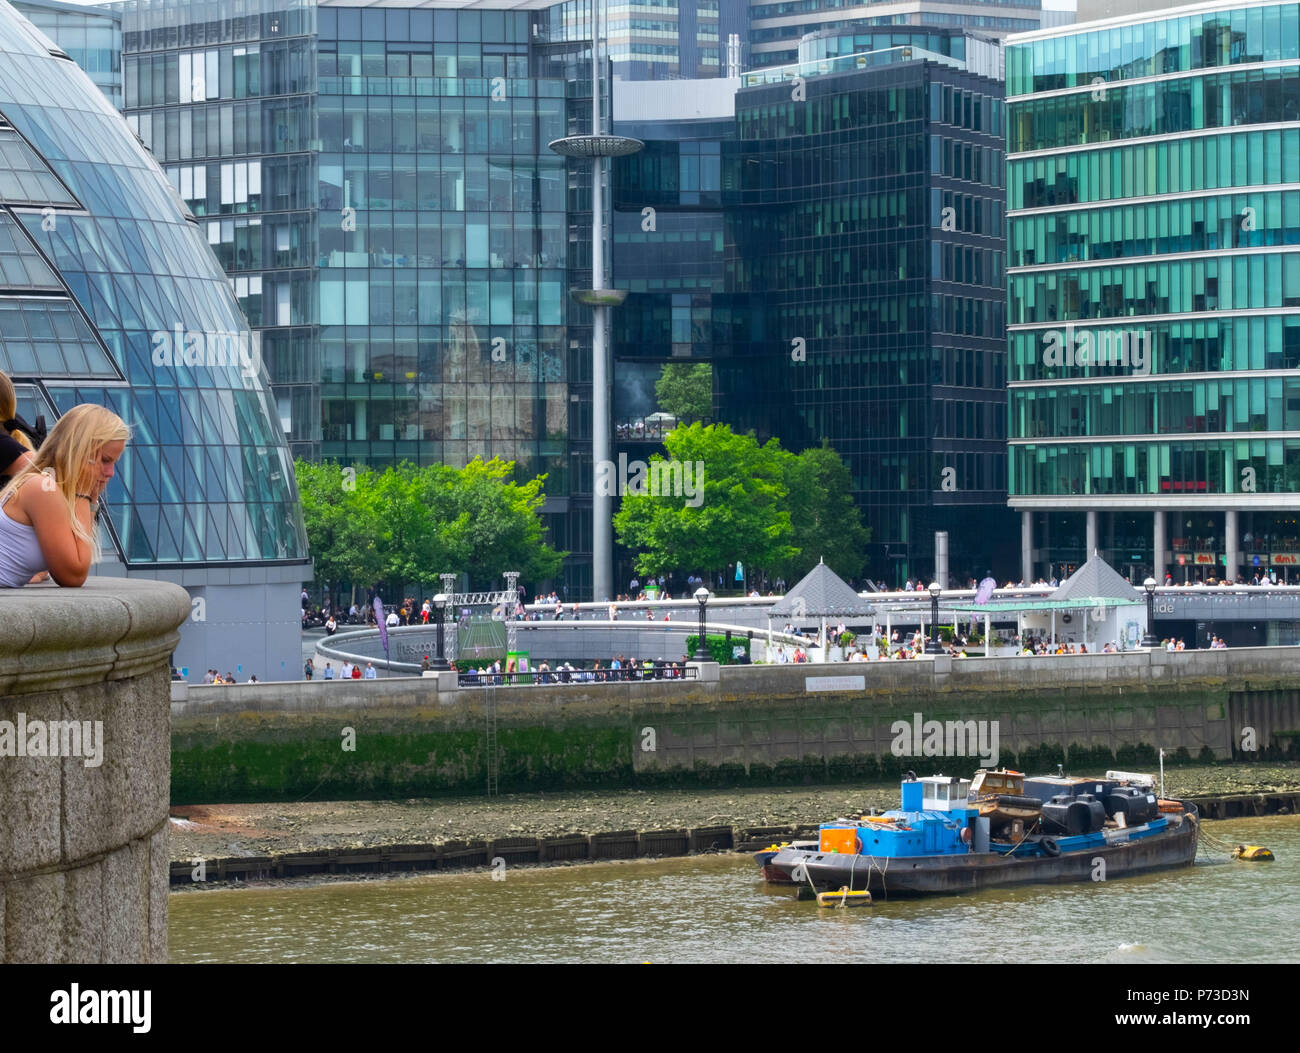 London, England. 4th July 2018. Tourists enjoy the river near London's Tower Bridge on another very hot day. The present heatwave is set to continue. ©Tim Ring/Alamy Live News Stock Photo